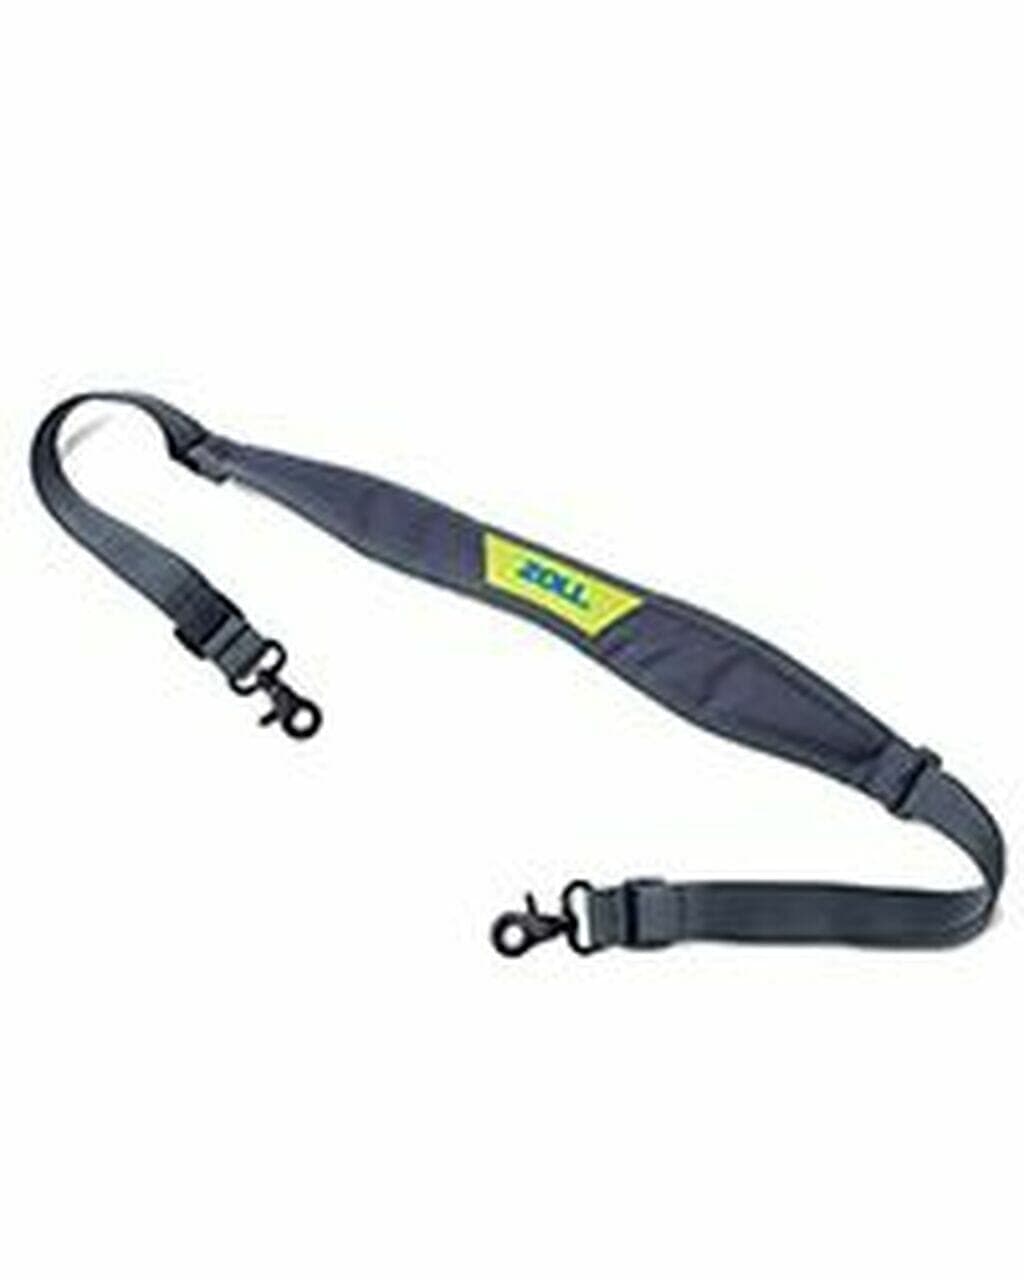 Replacement Shoulder Strap For AED 3 Carry Case